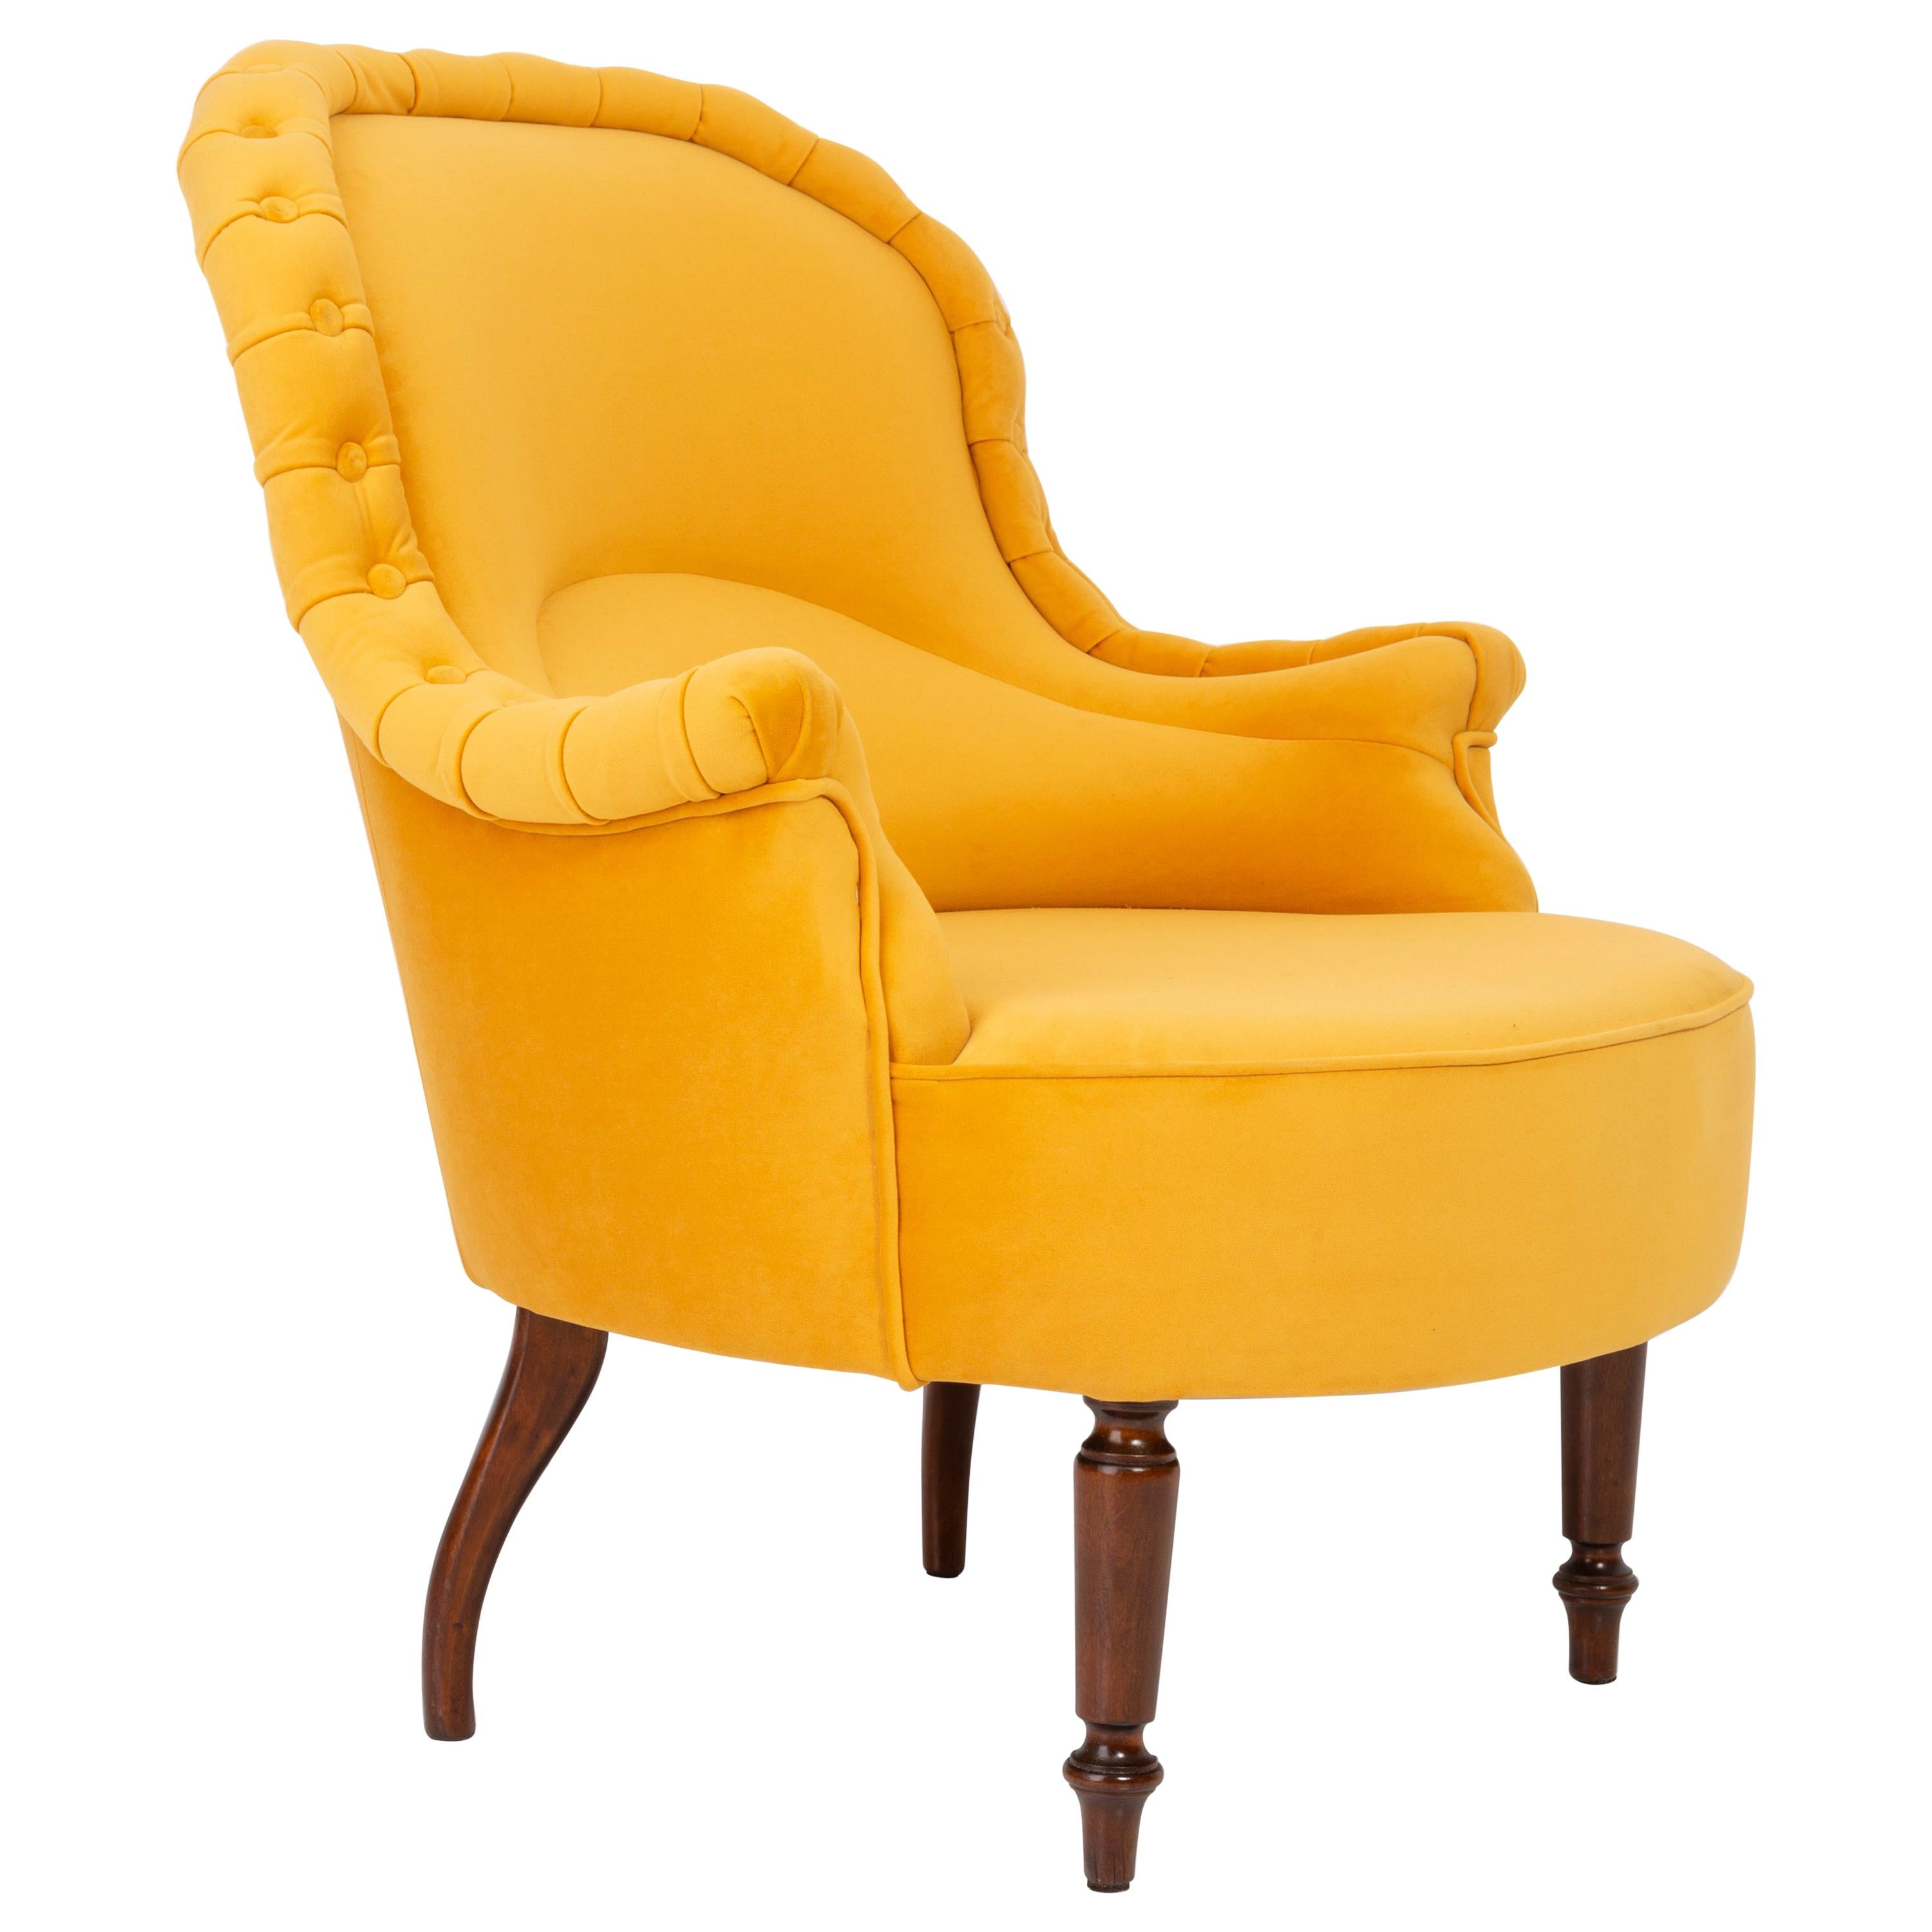 Unique Yellow Mustard Armchair, 1930s, Germany